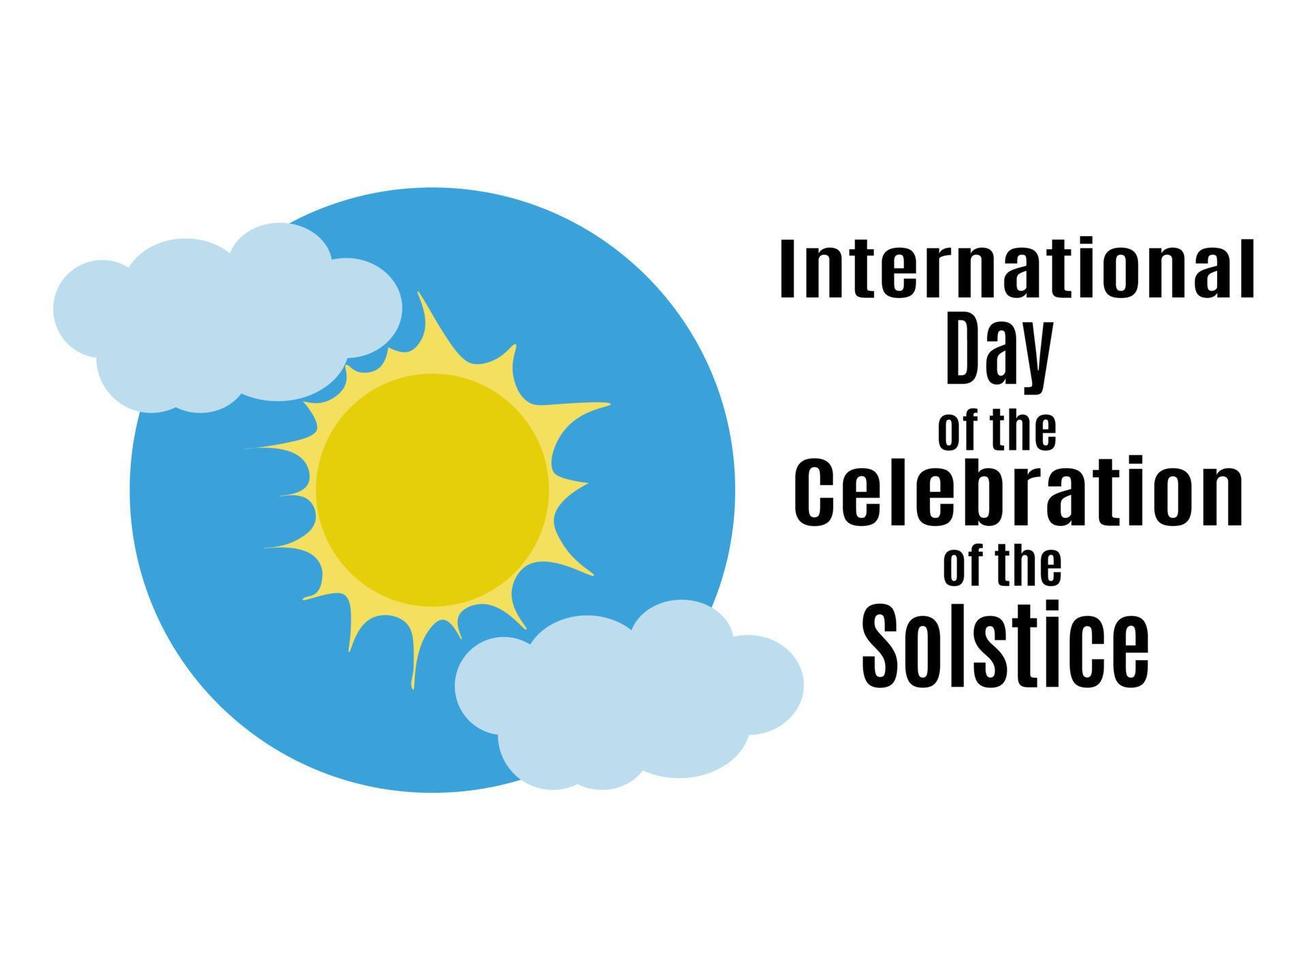 International Day of the Celebration of the Solstice, idea for poster, banner, flyer or postcard vector